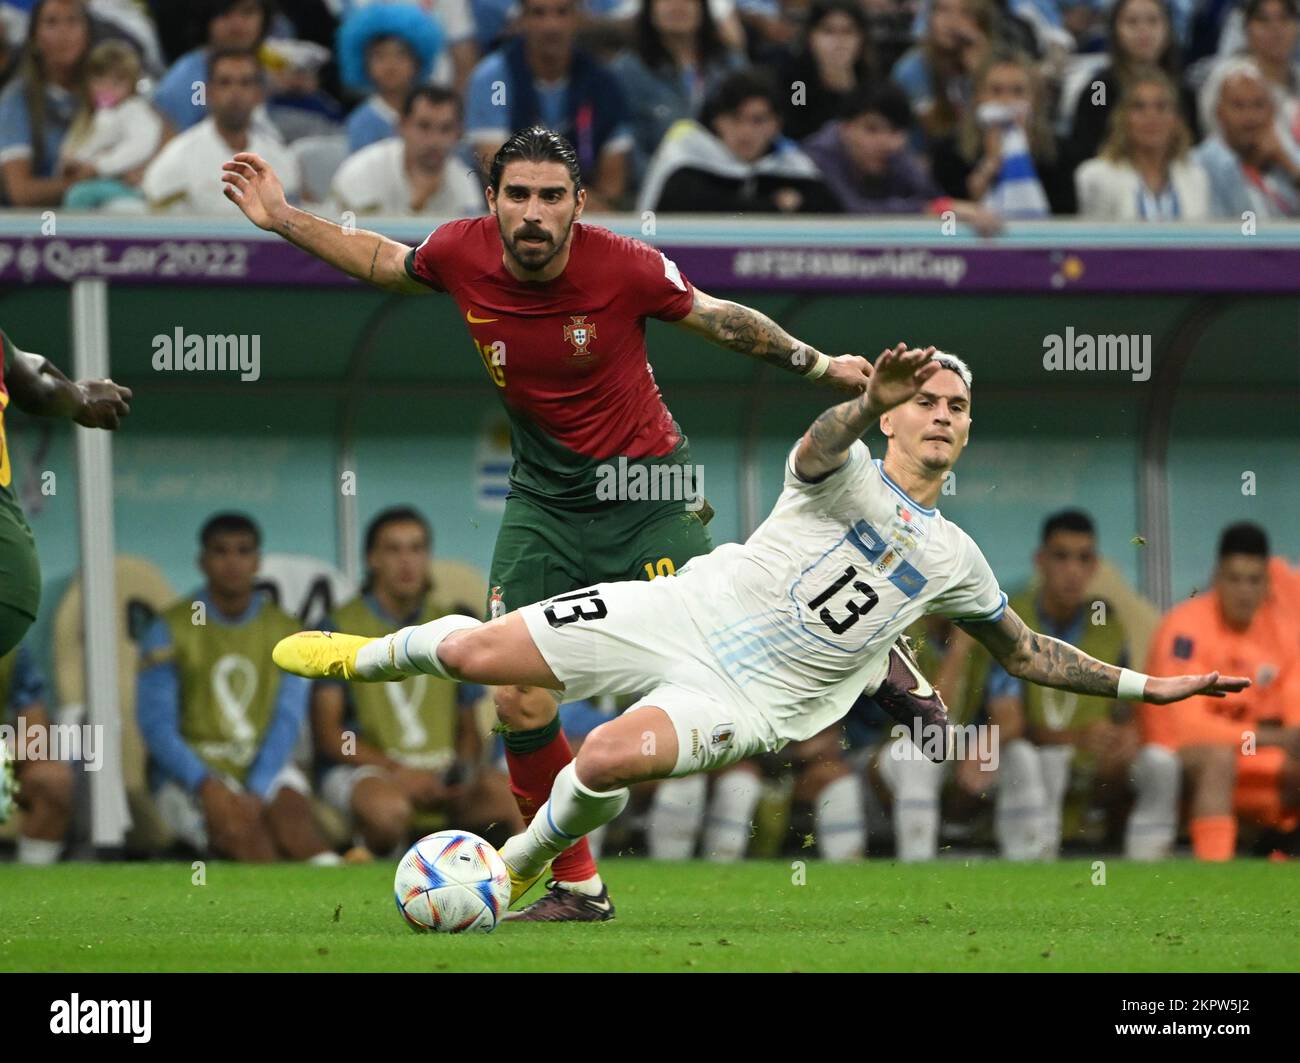 Lusail, Qatar. 28th Nov, 2022. Ruben Neves (L) of Portugal vies with Guillermo Varela of Uruguay during the Group H match between Portugal and Uruguay at the 2022 FIFA World Cup at Lusail Stadium in Lusail, Qatar, Nov. 28, 2022. Credit: Li Ga/Xinhua/Alamy Live News Stock Photo